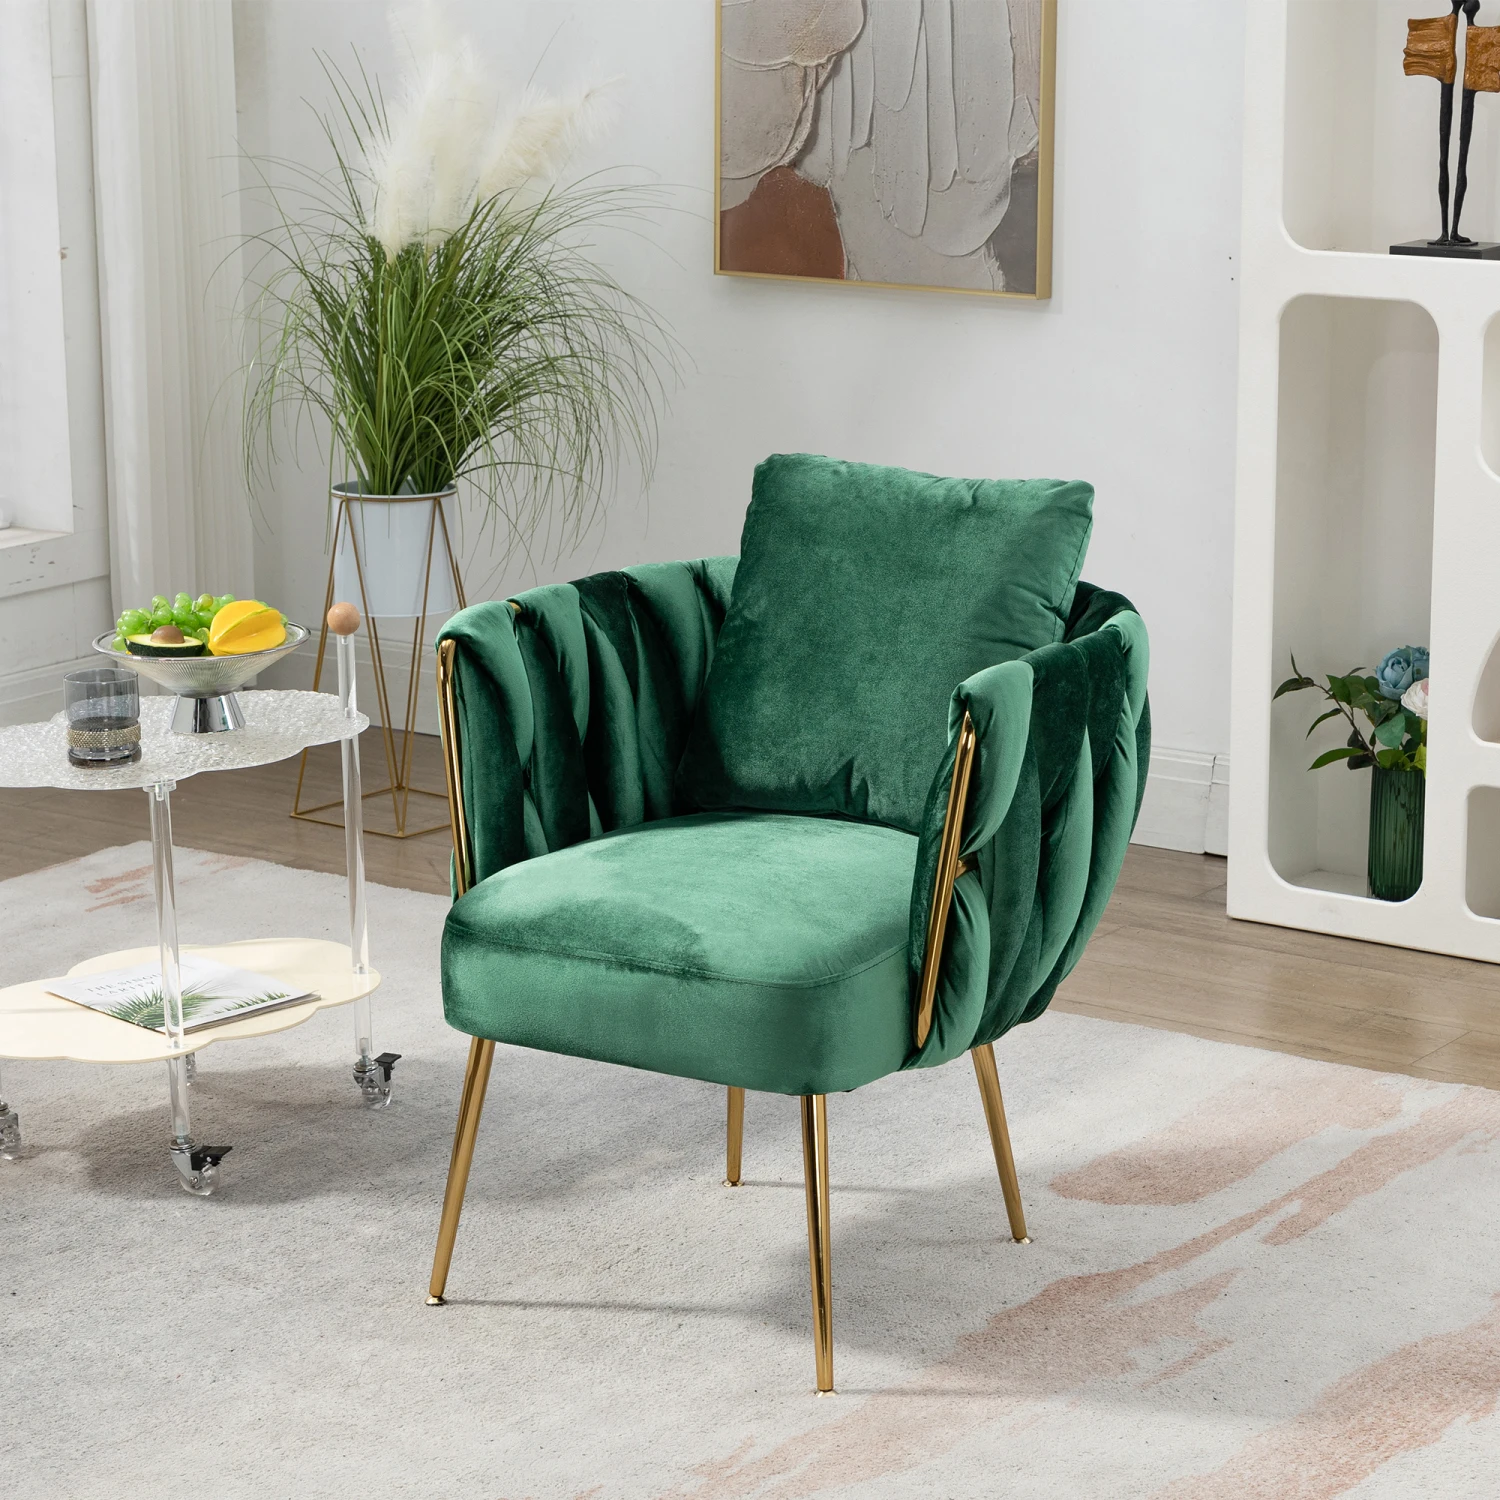 Handmade Wide Modern Green Velvet Accent Chair with Gold Metal Leg - Upholstered Armchair for Living Room, Bedroom, Office - Lux